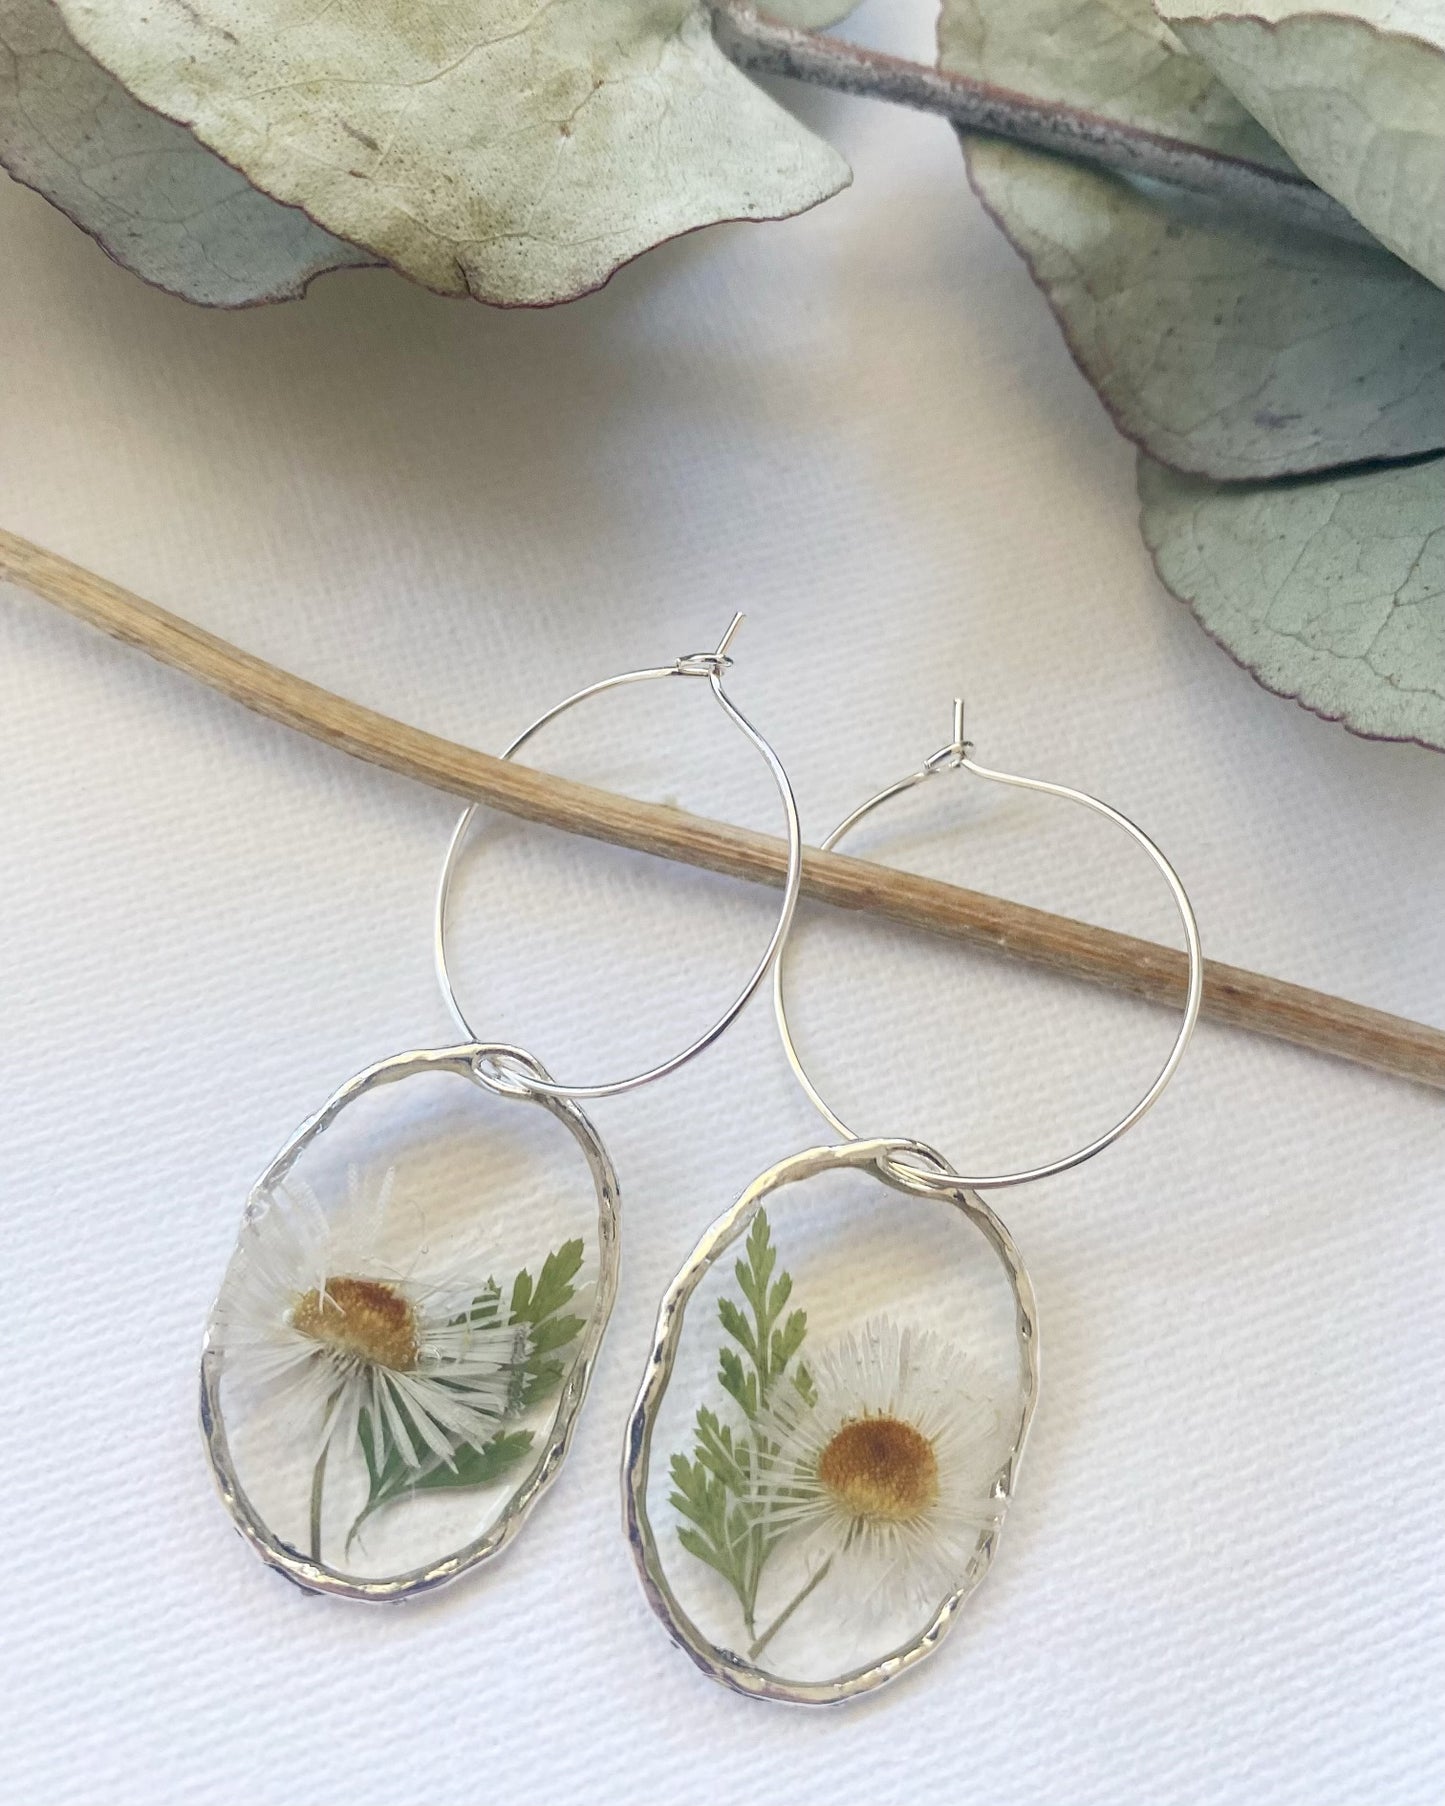 Pressed White Daisy and Fern Earrings